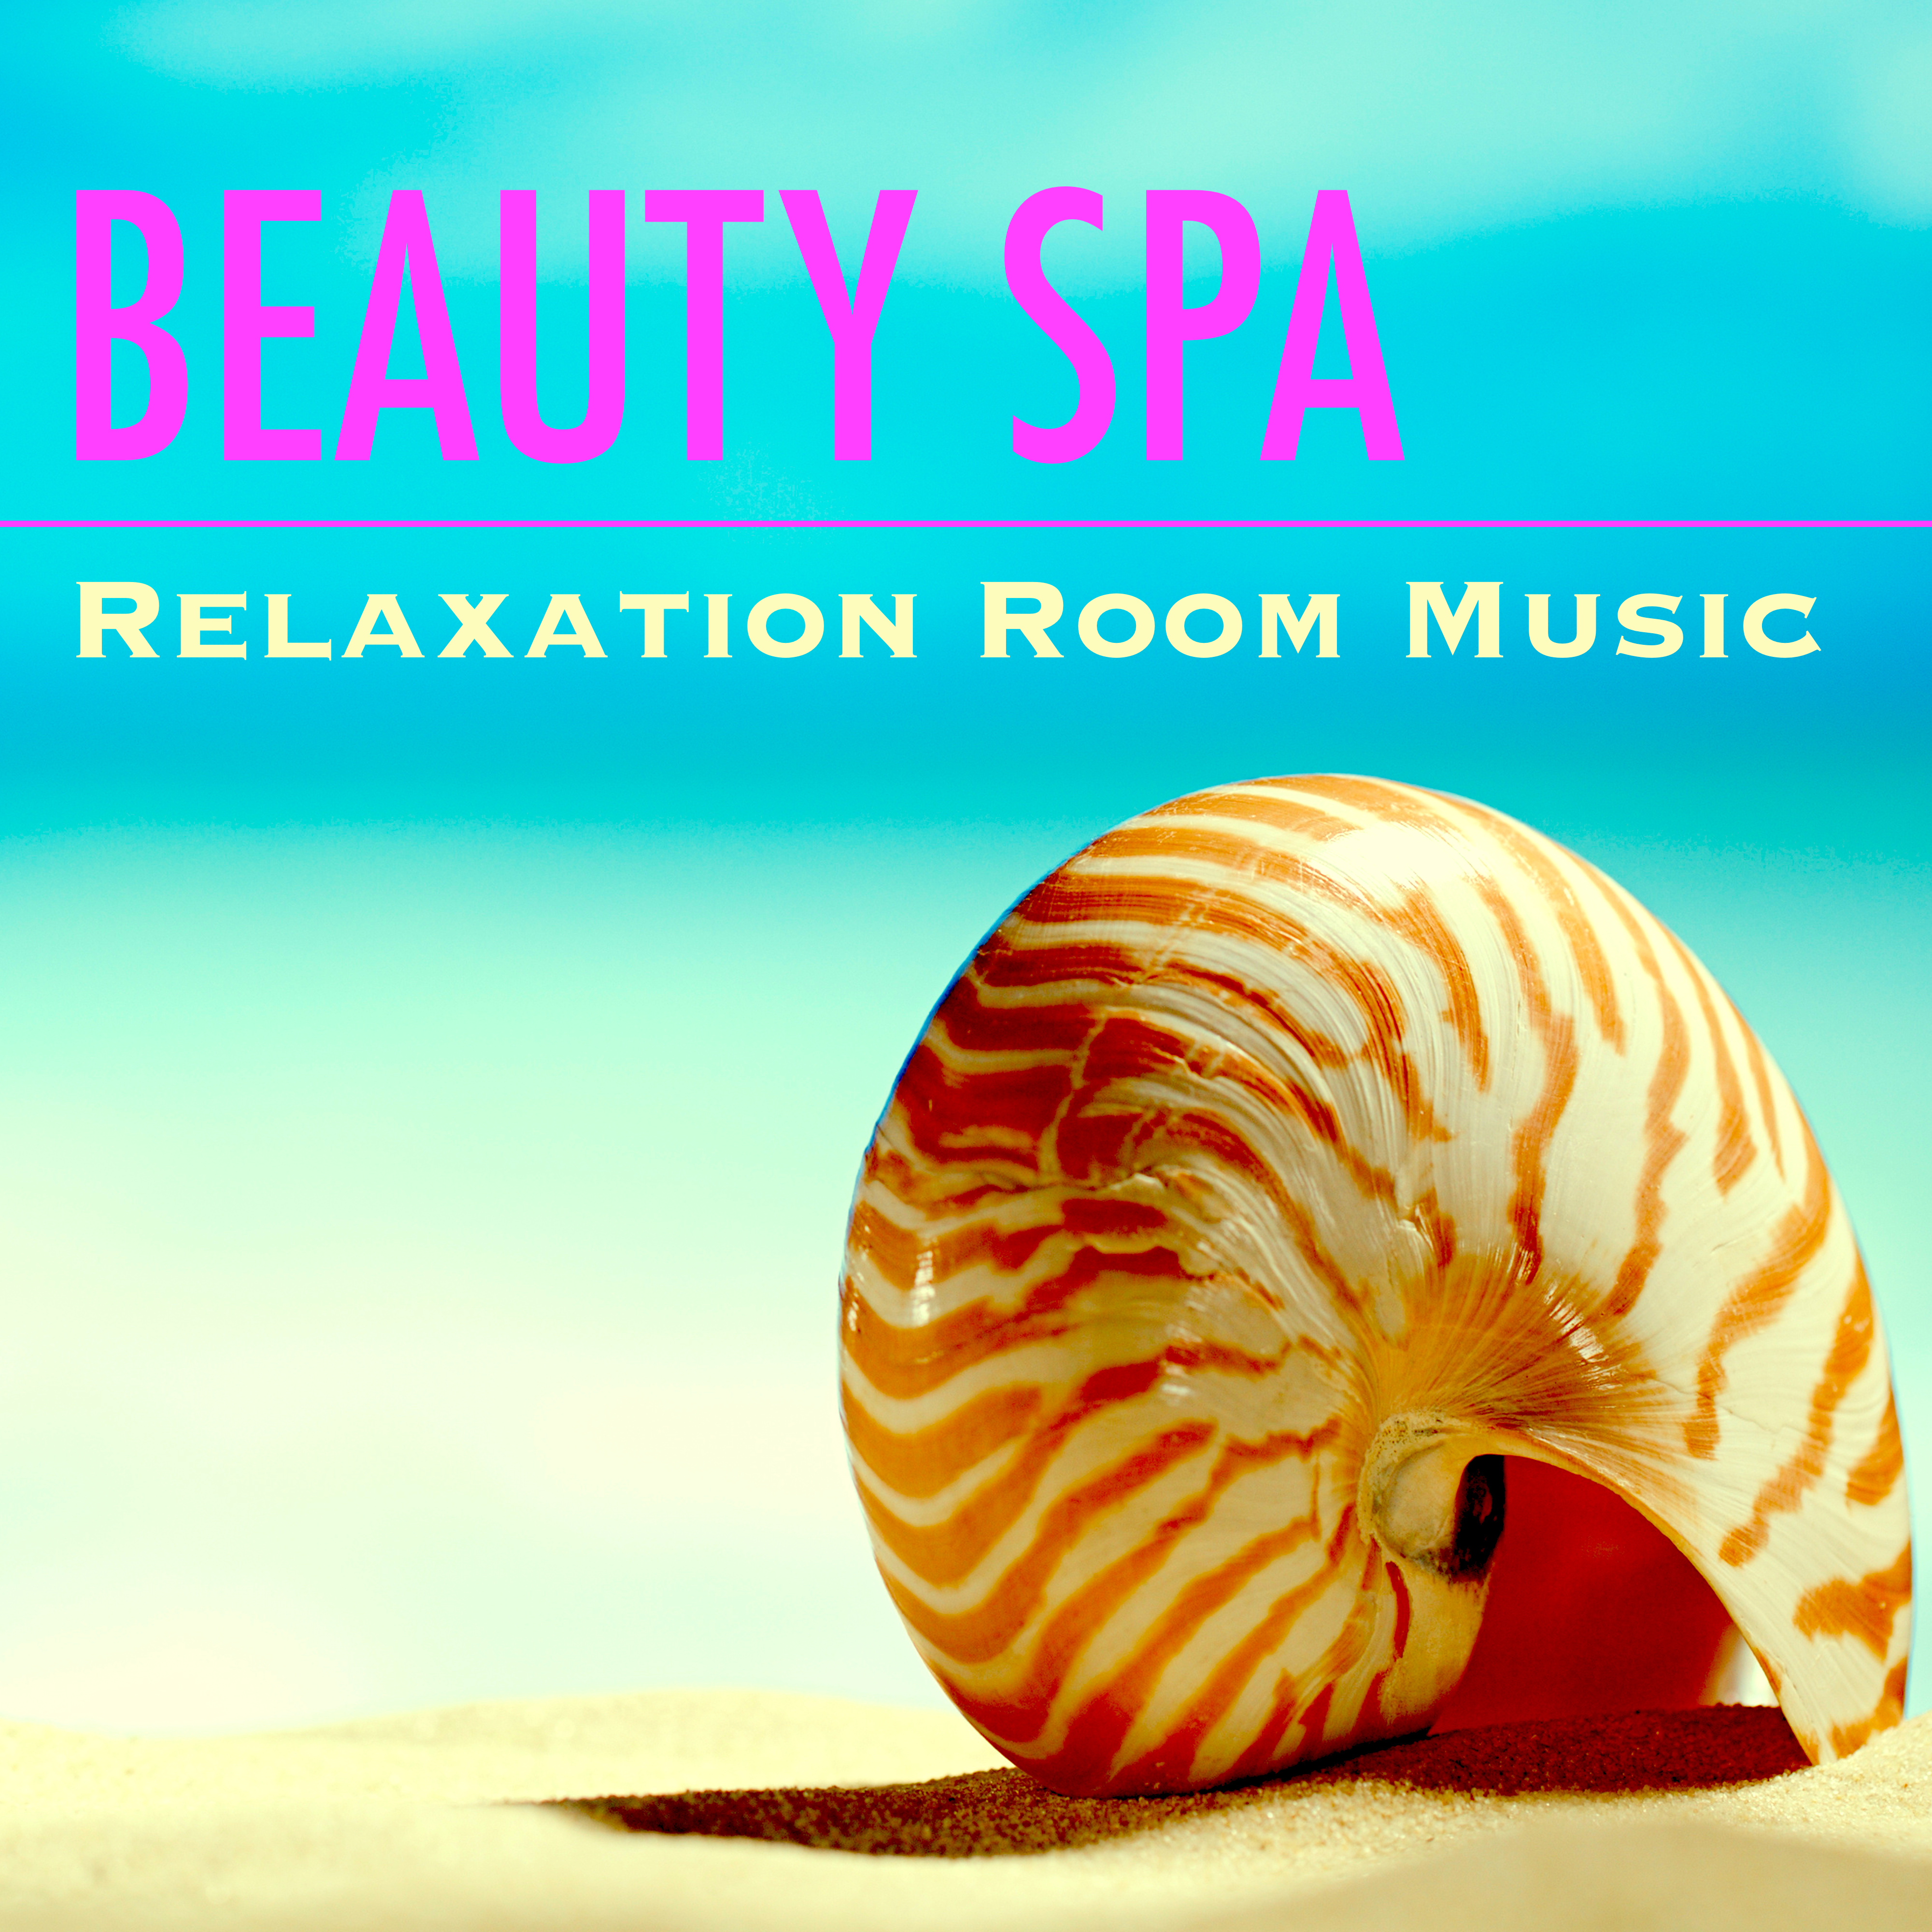 Beauty Spa  Relaxation Room Music: Songs for Sauna Benefits, Relaxation after Infrared Sauna, Green Tea